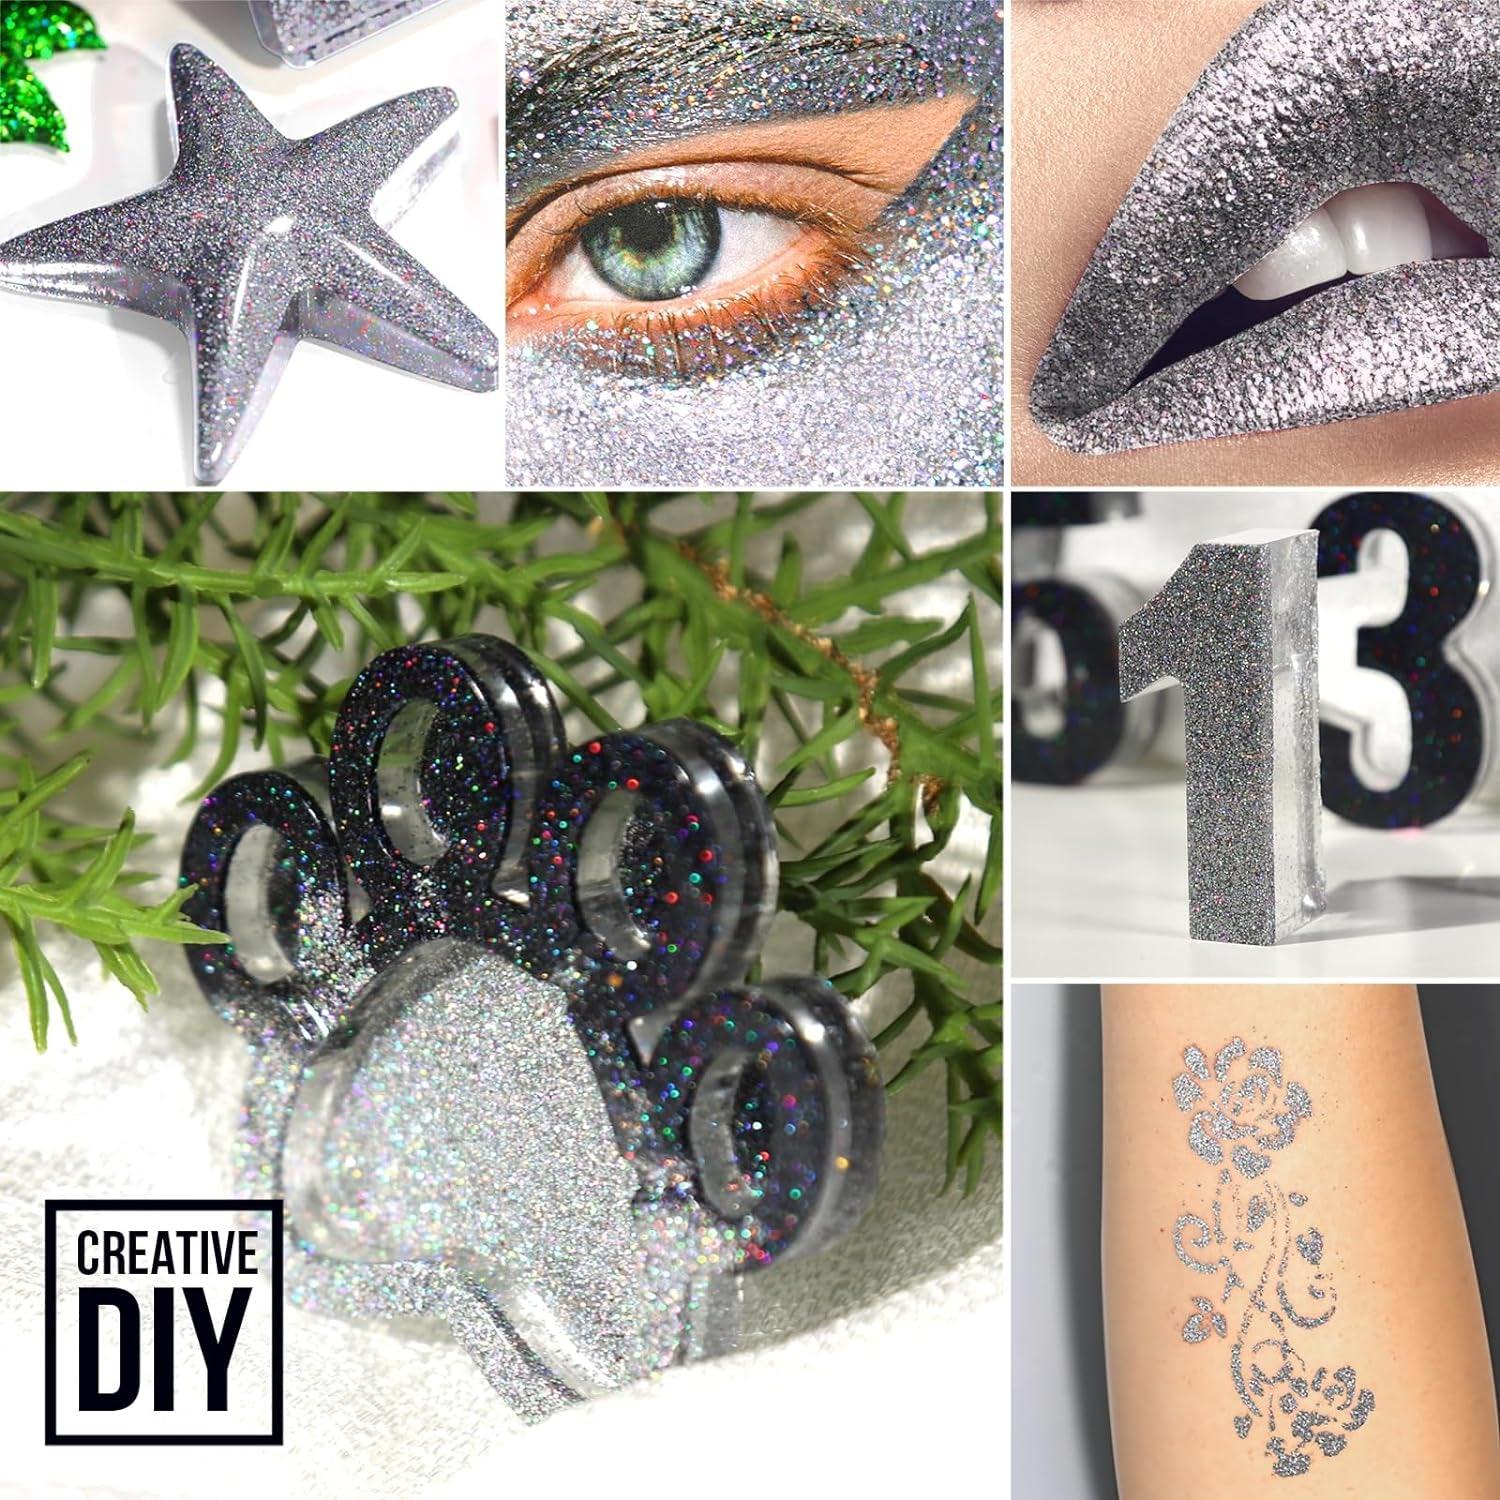 Holographic Ultra Fine Glitter & Chunky Glitters, 110G Resin Glitter and 100G Chunky Craft Glitter, Nail Glitters, Festival Glitters for Epoxy Resin Tumblers Body Hair Face Crafts-Silver - WoodArtSupply